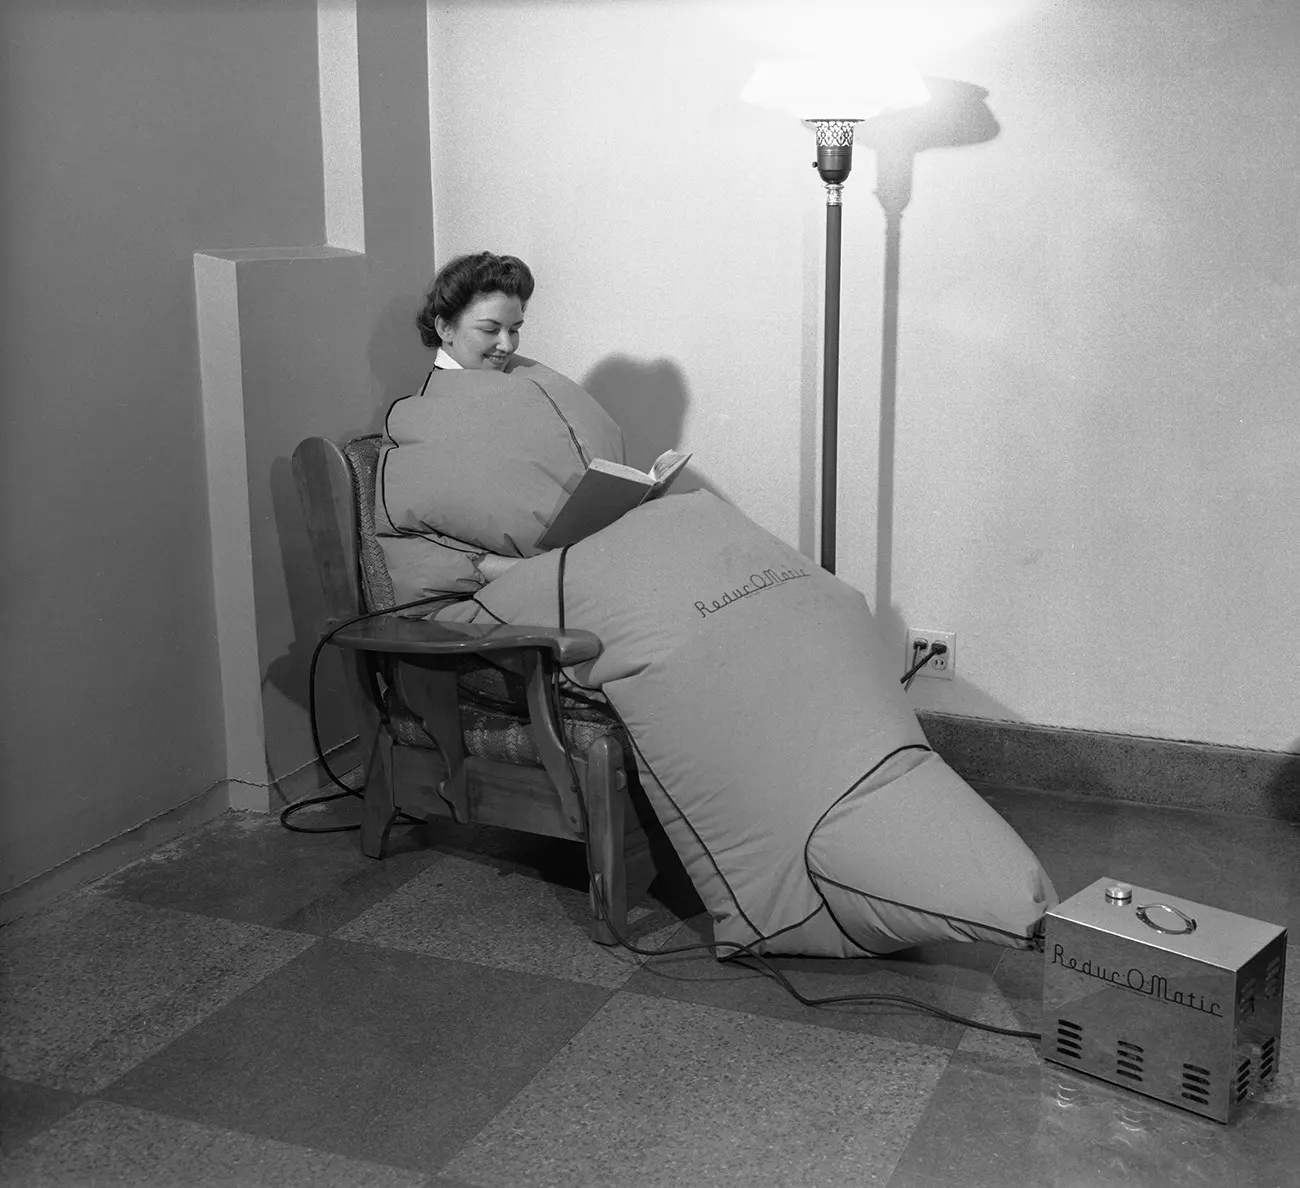 portable sauna, known as the Reduc-o-matic, became popular in the 1940s. It was believed to melt fat.